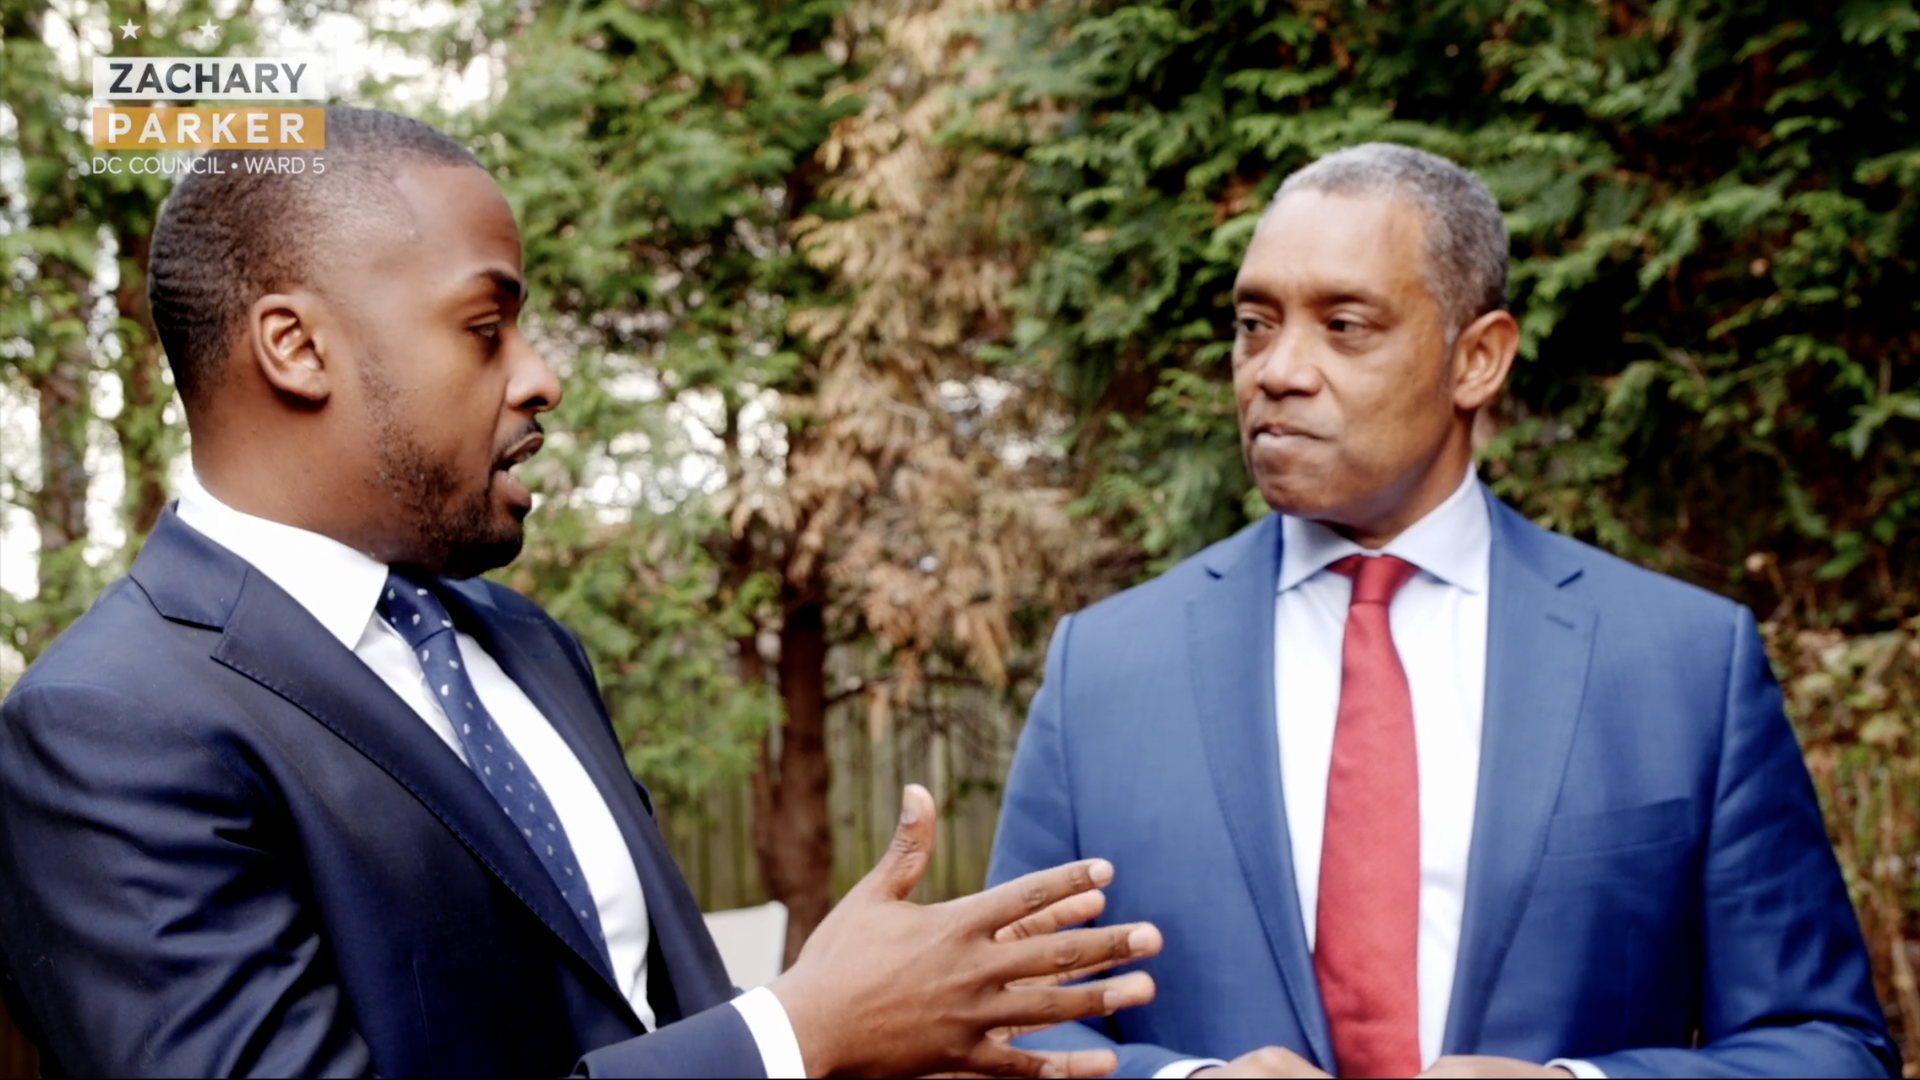 Zachary Parker and Karl Racine having a conversation, taken from a campaign video.